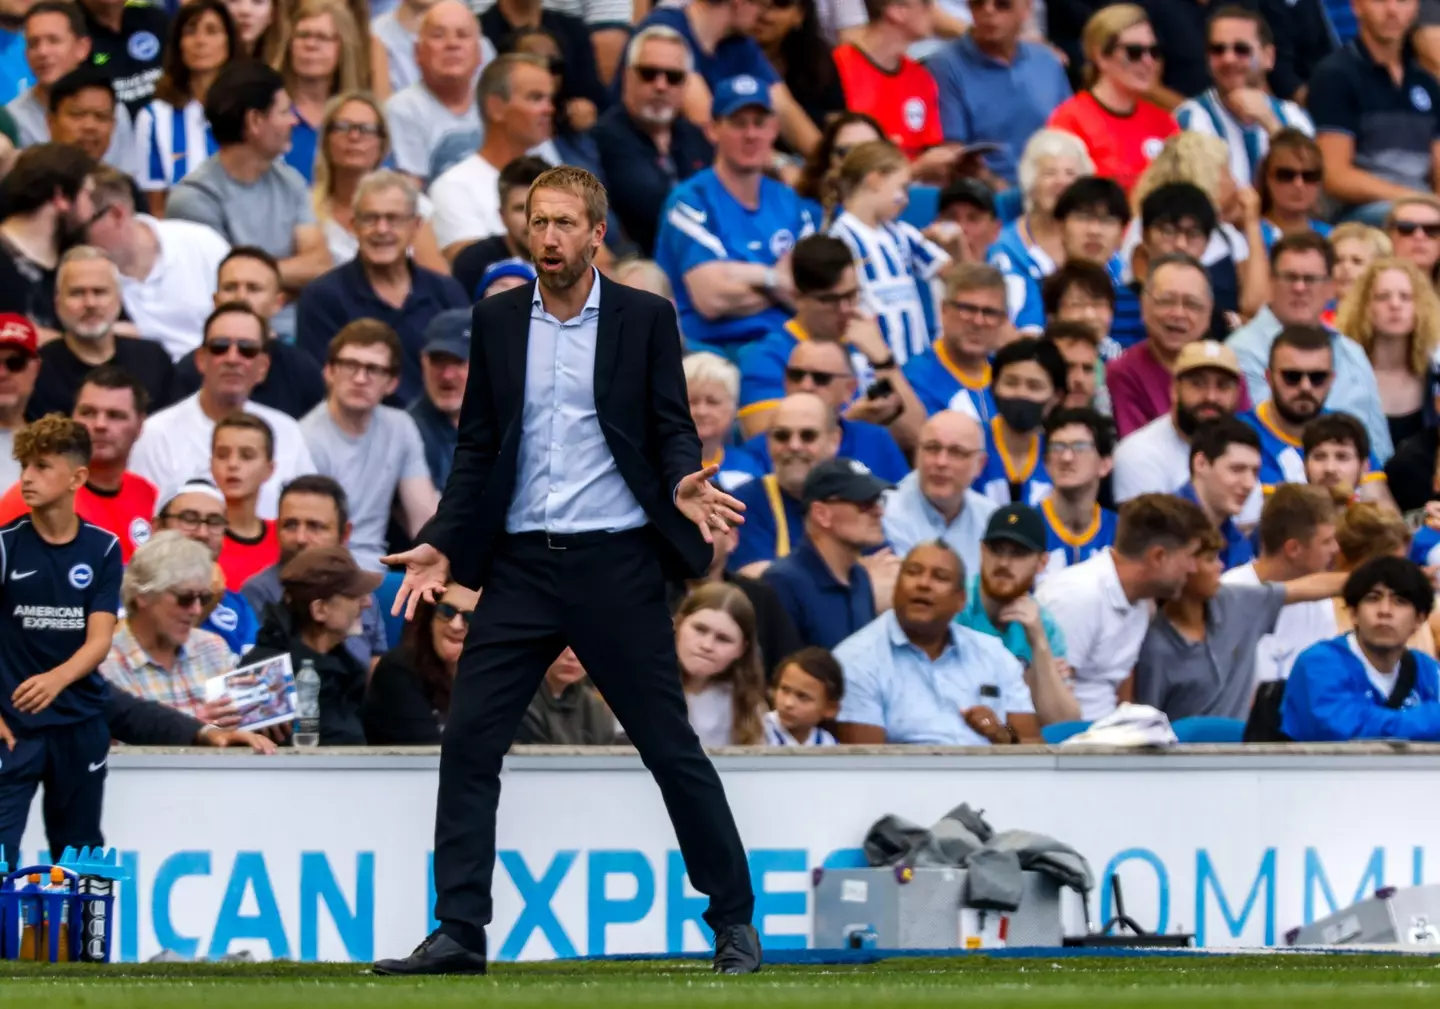 Graham Potter could be the next permanent Chelsea manager. (Alamy)